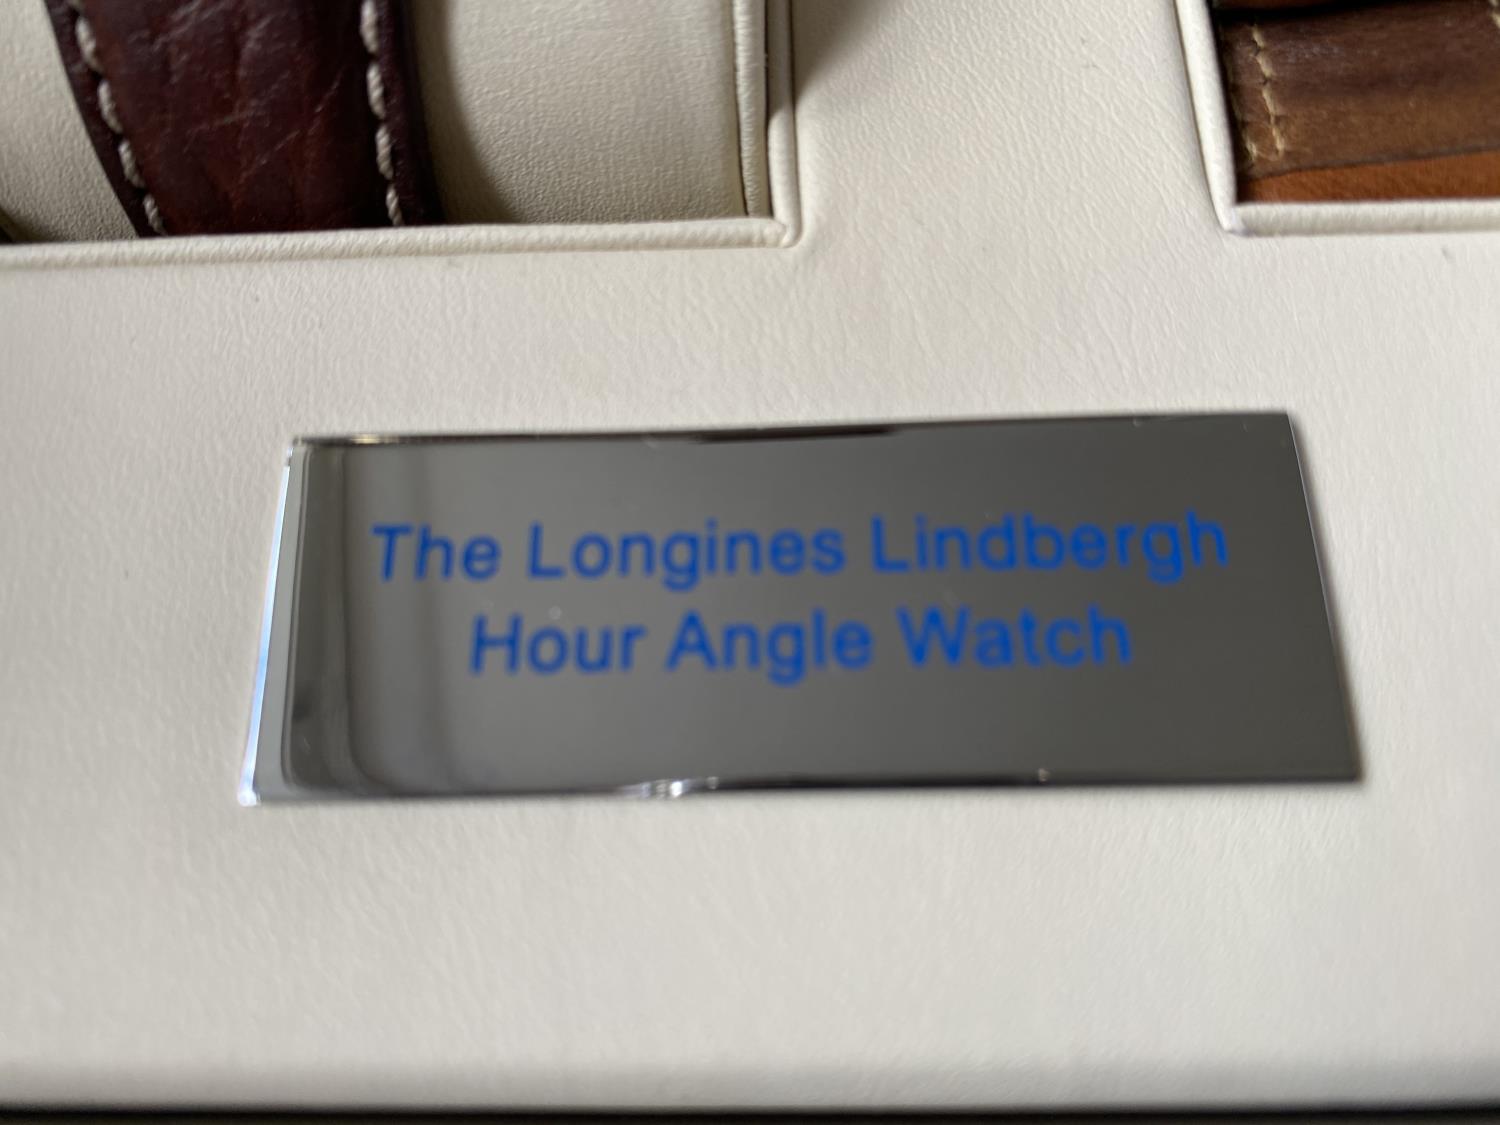 A LONGINES LINDEBERGH HOUR ANGLE WRIST WATCH WITH SOLID YELLOW GOLD CASE AND BEZEL, AUTOMATIC - Image 10 of 12